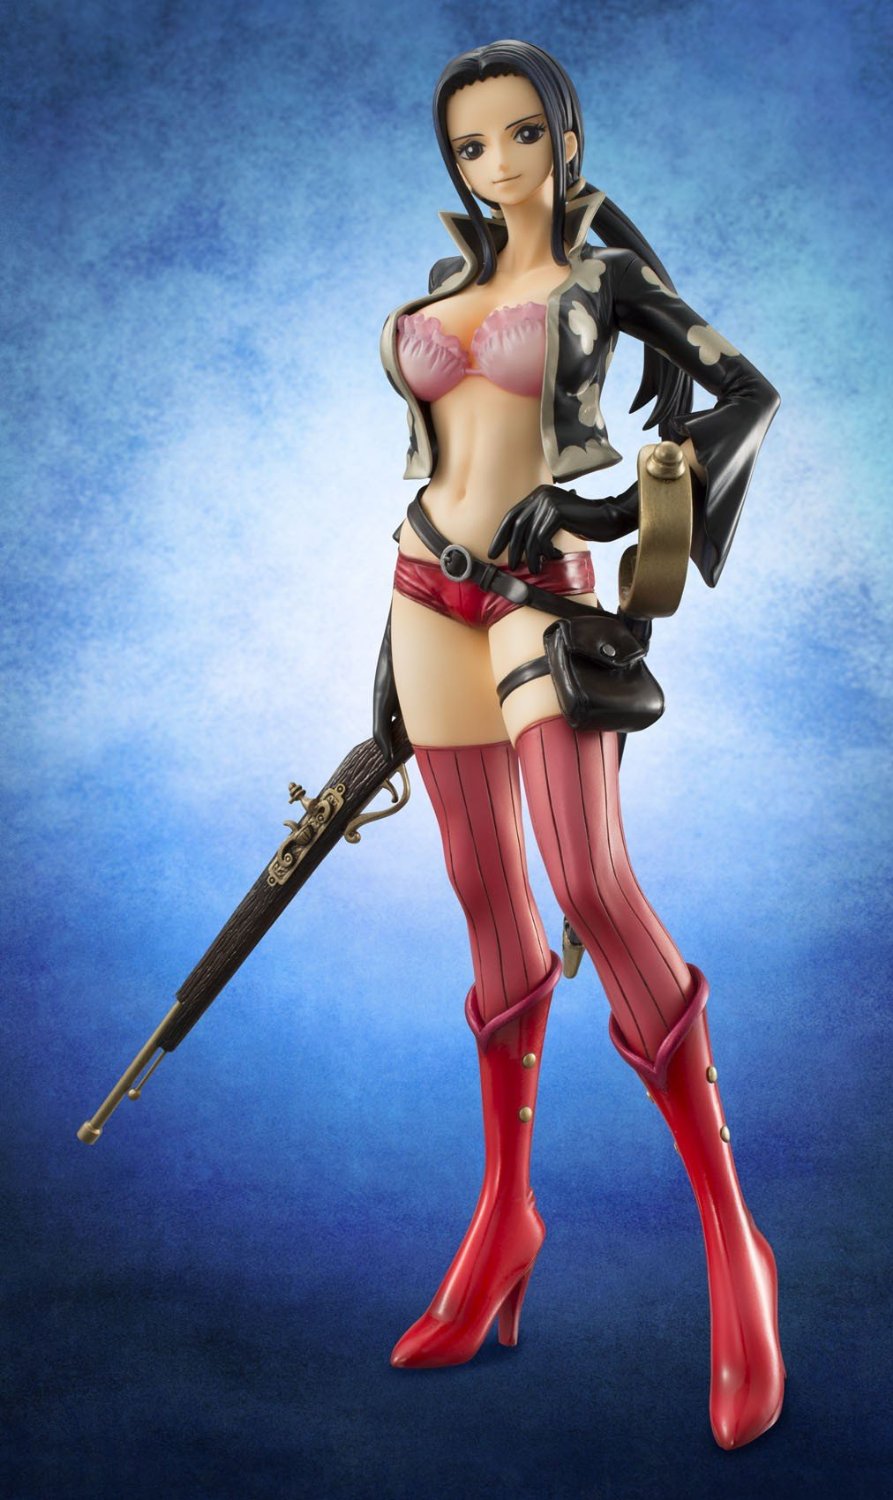 Robin one piece artificial girl 3 adult scene